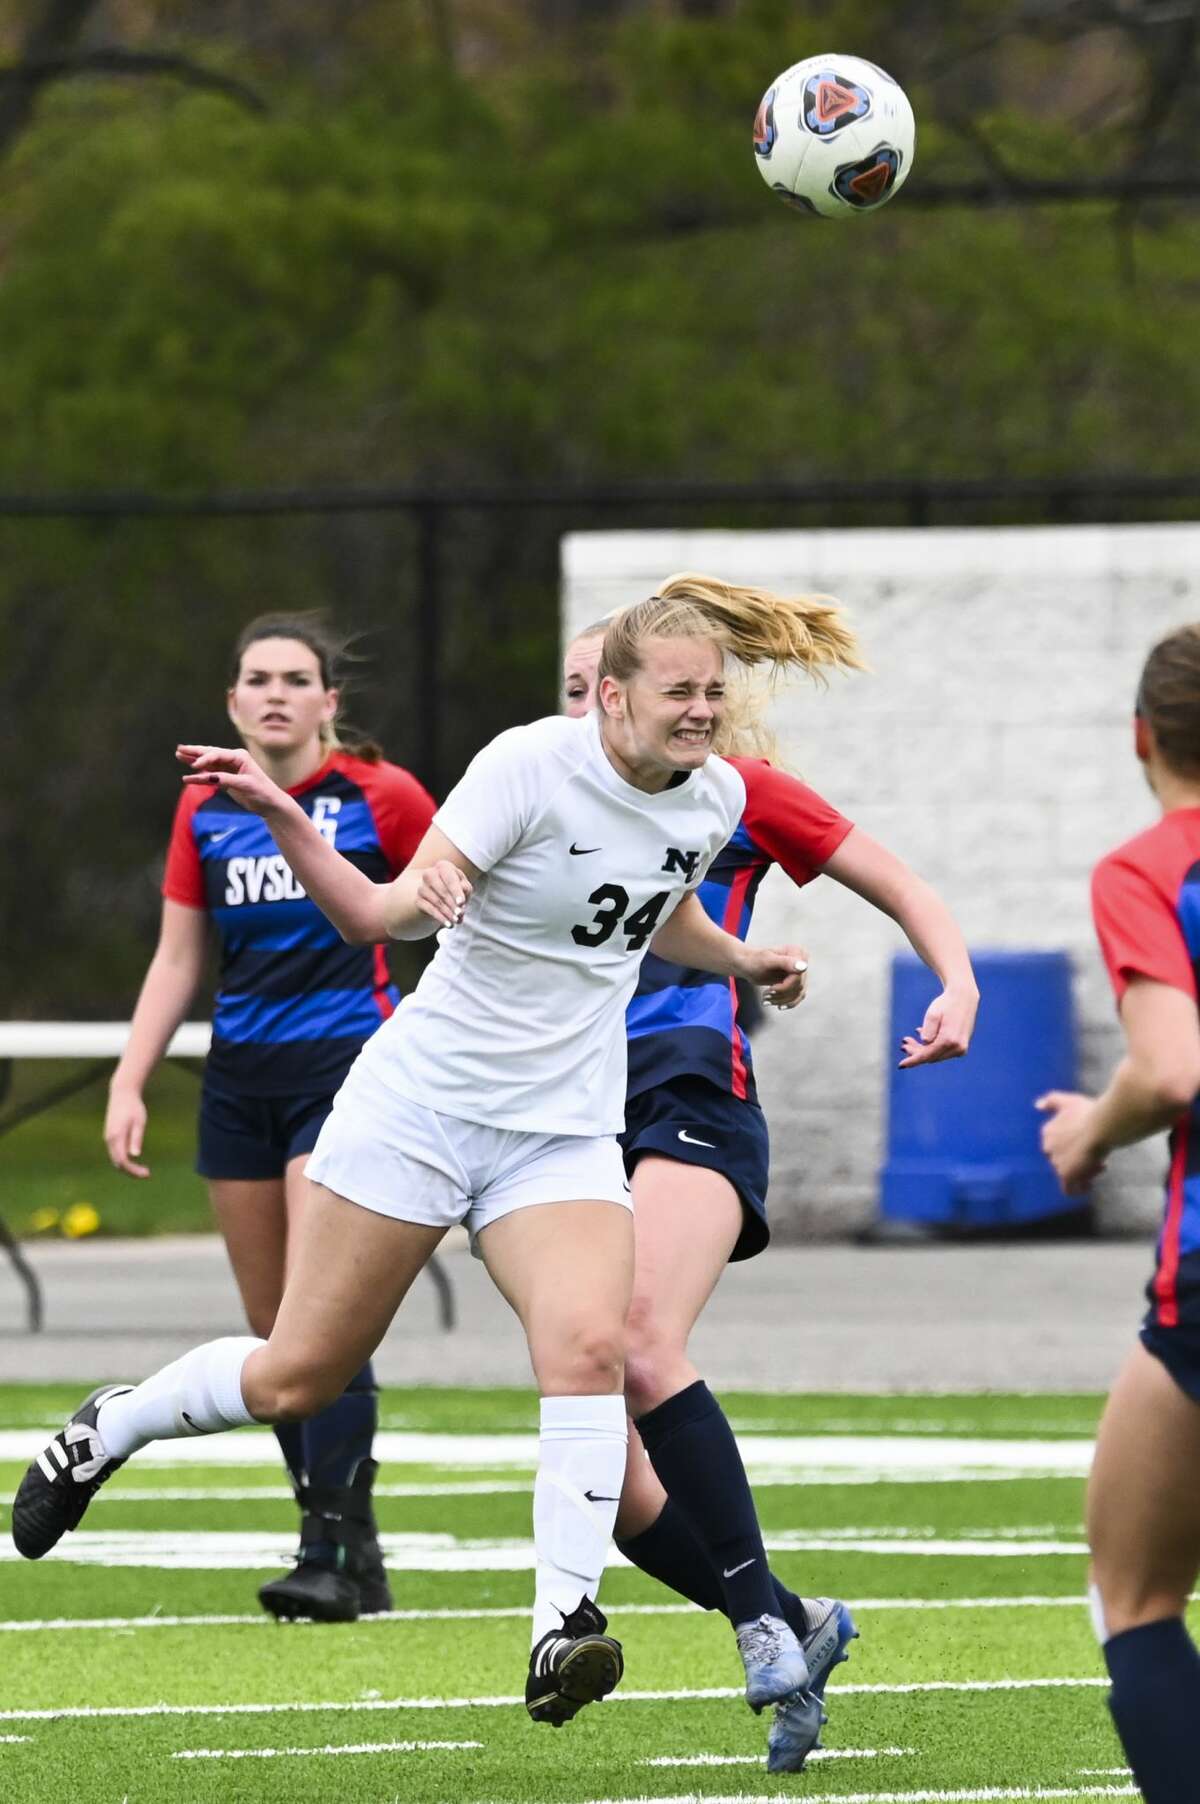 Northwood University's Katie Foster jumps up for a header during the Timberwolves' game against Saginaw Valley State University Saturday, April 24, 2021 at Northwood. (Adam Ferman/for the Daily News)